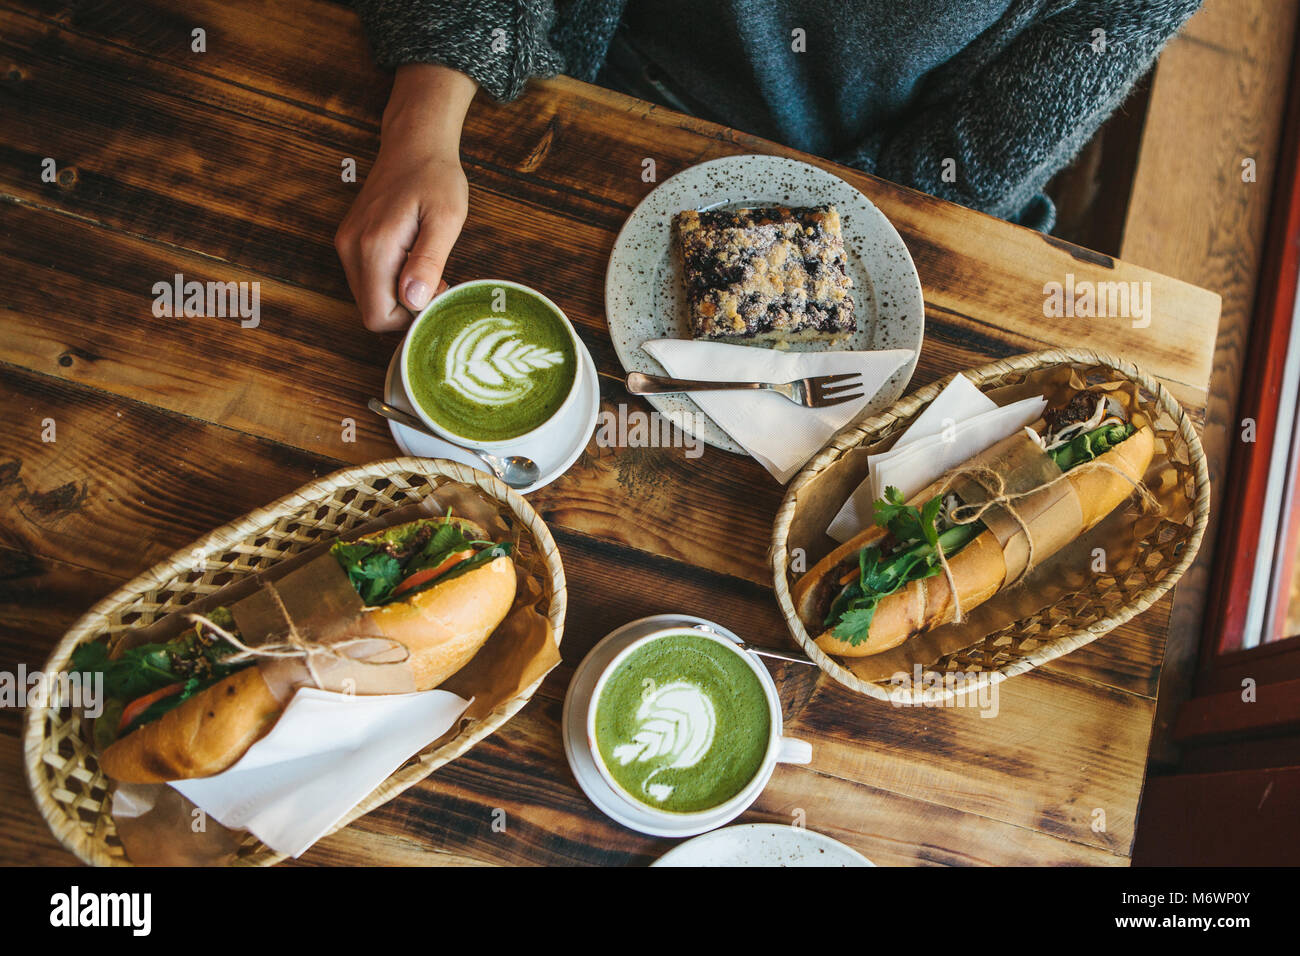 Top view - The girl sitting in cafe and holding mug with green tea with milk next to piece of sweet pie and two sandwiches with vegetables. Stock Photo